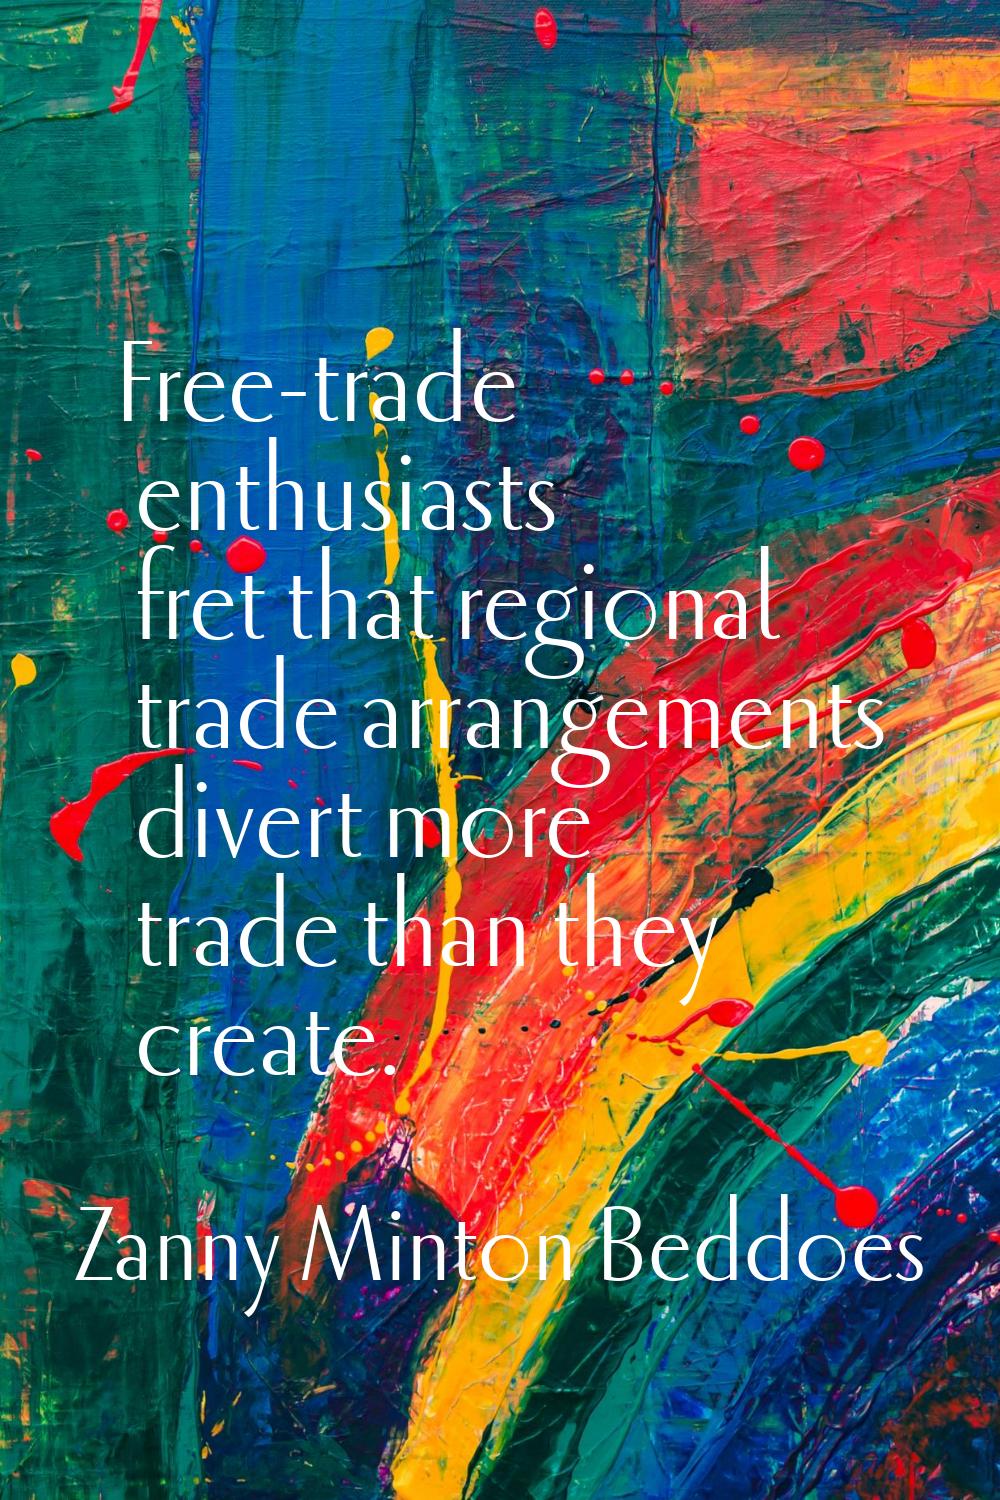 Free-trade enthusiasts fret that regional trade arrangements divert more trade than they create.